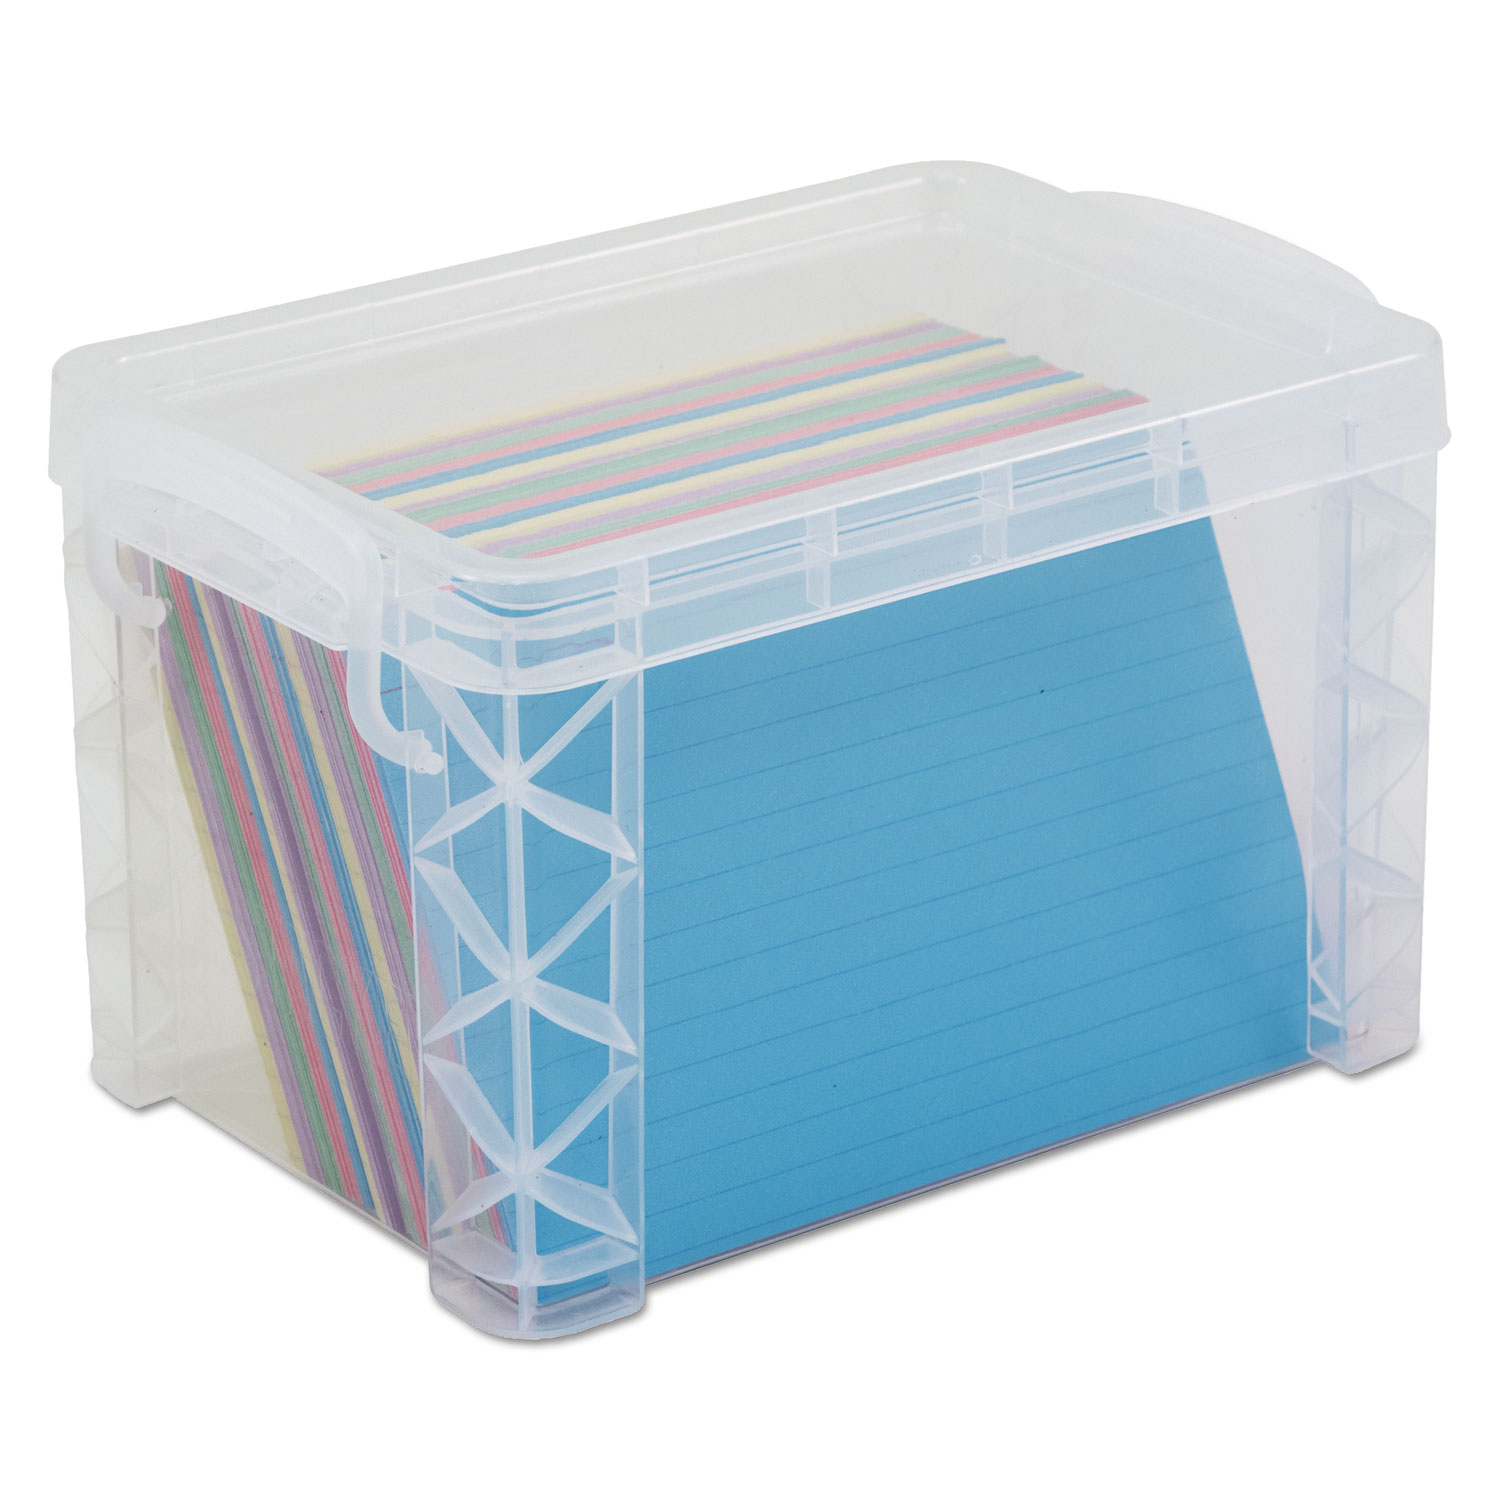 Super Stacker Storage Boxes, Hold 500 4 x 6 Cards, Plastic, Clear